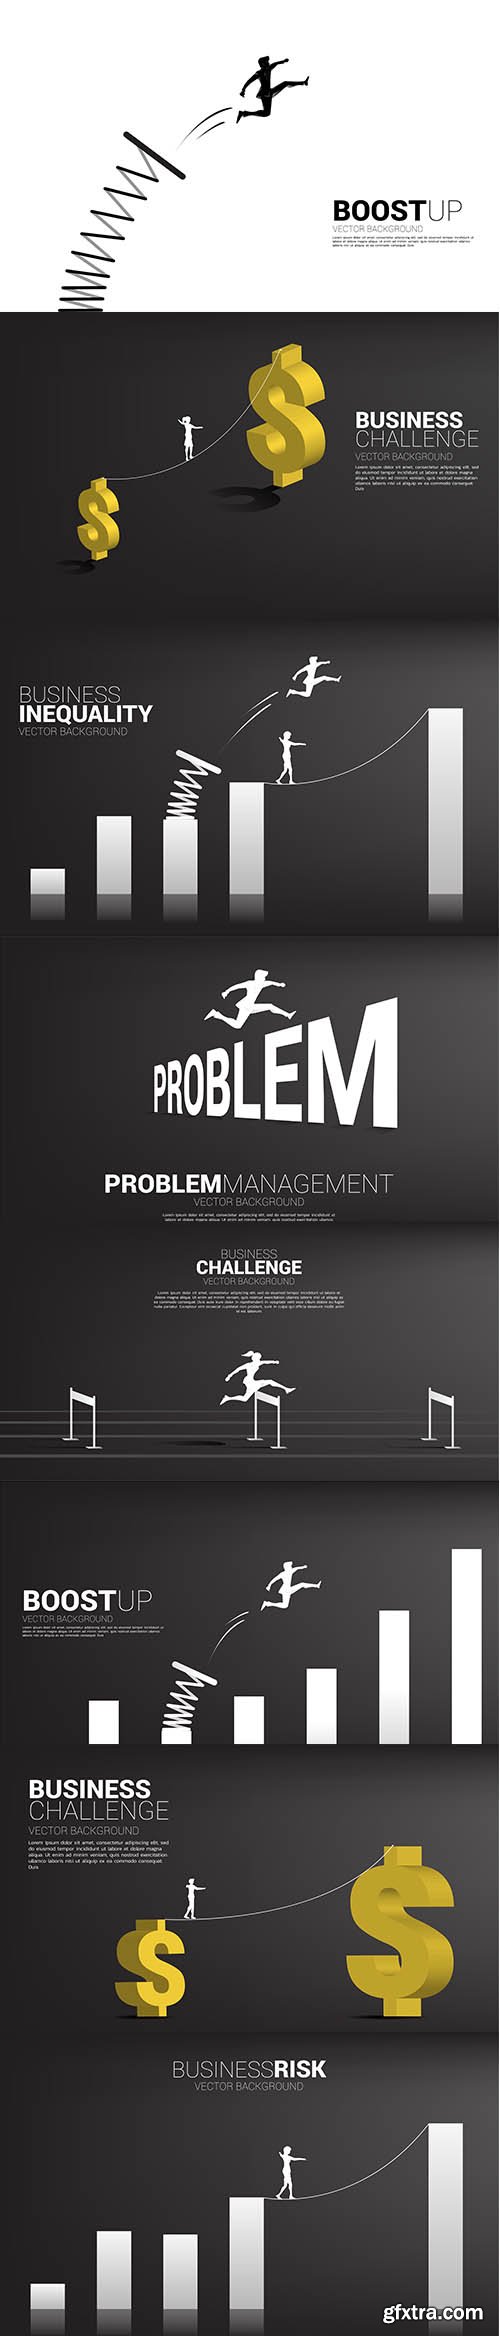 Silhouette businessman jumping across problem background concept for crisis